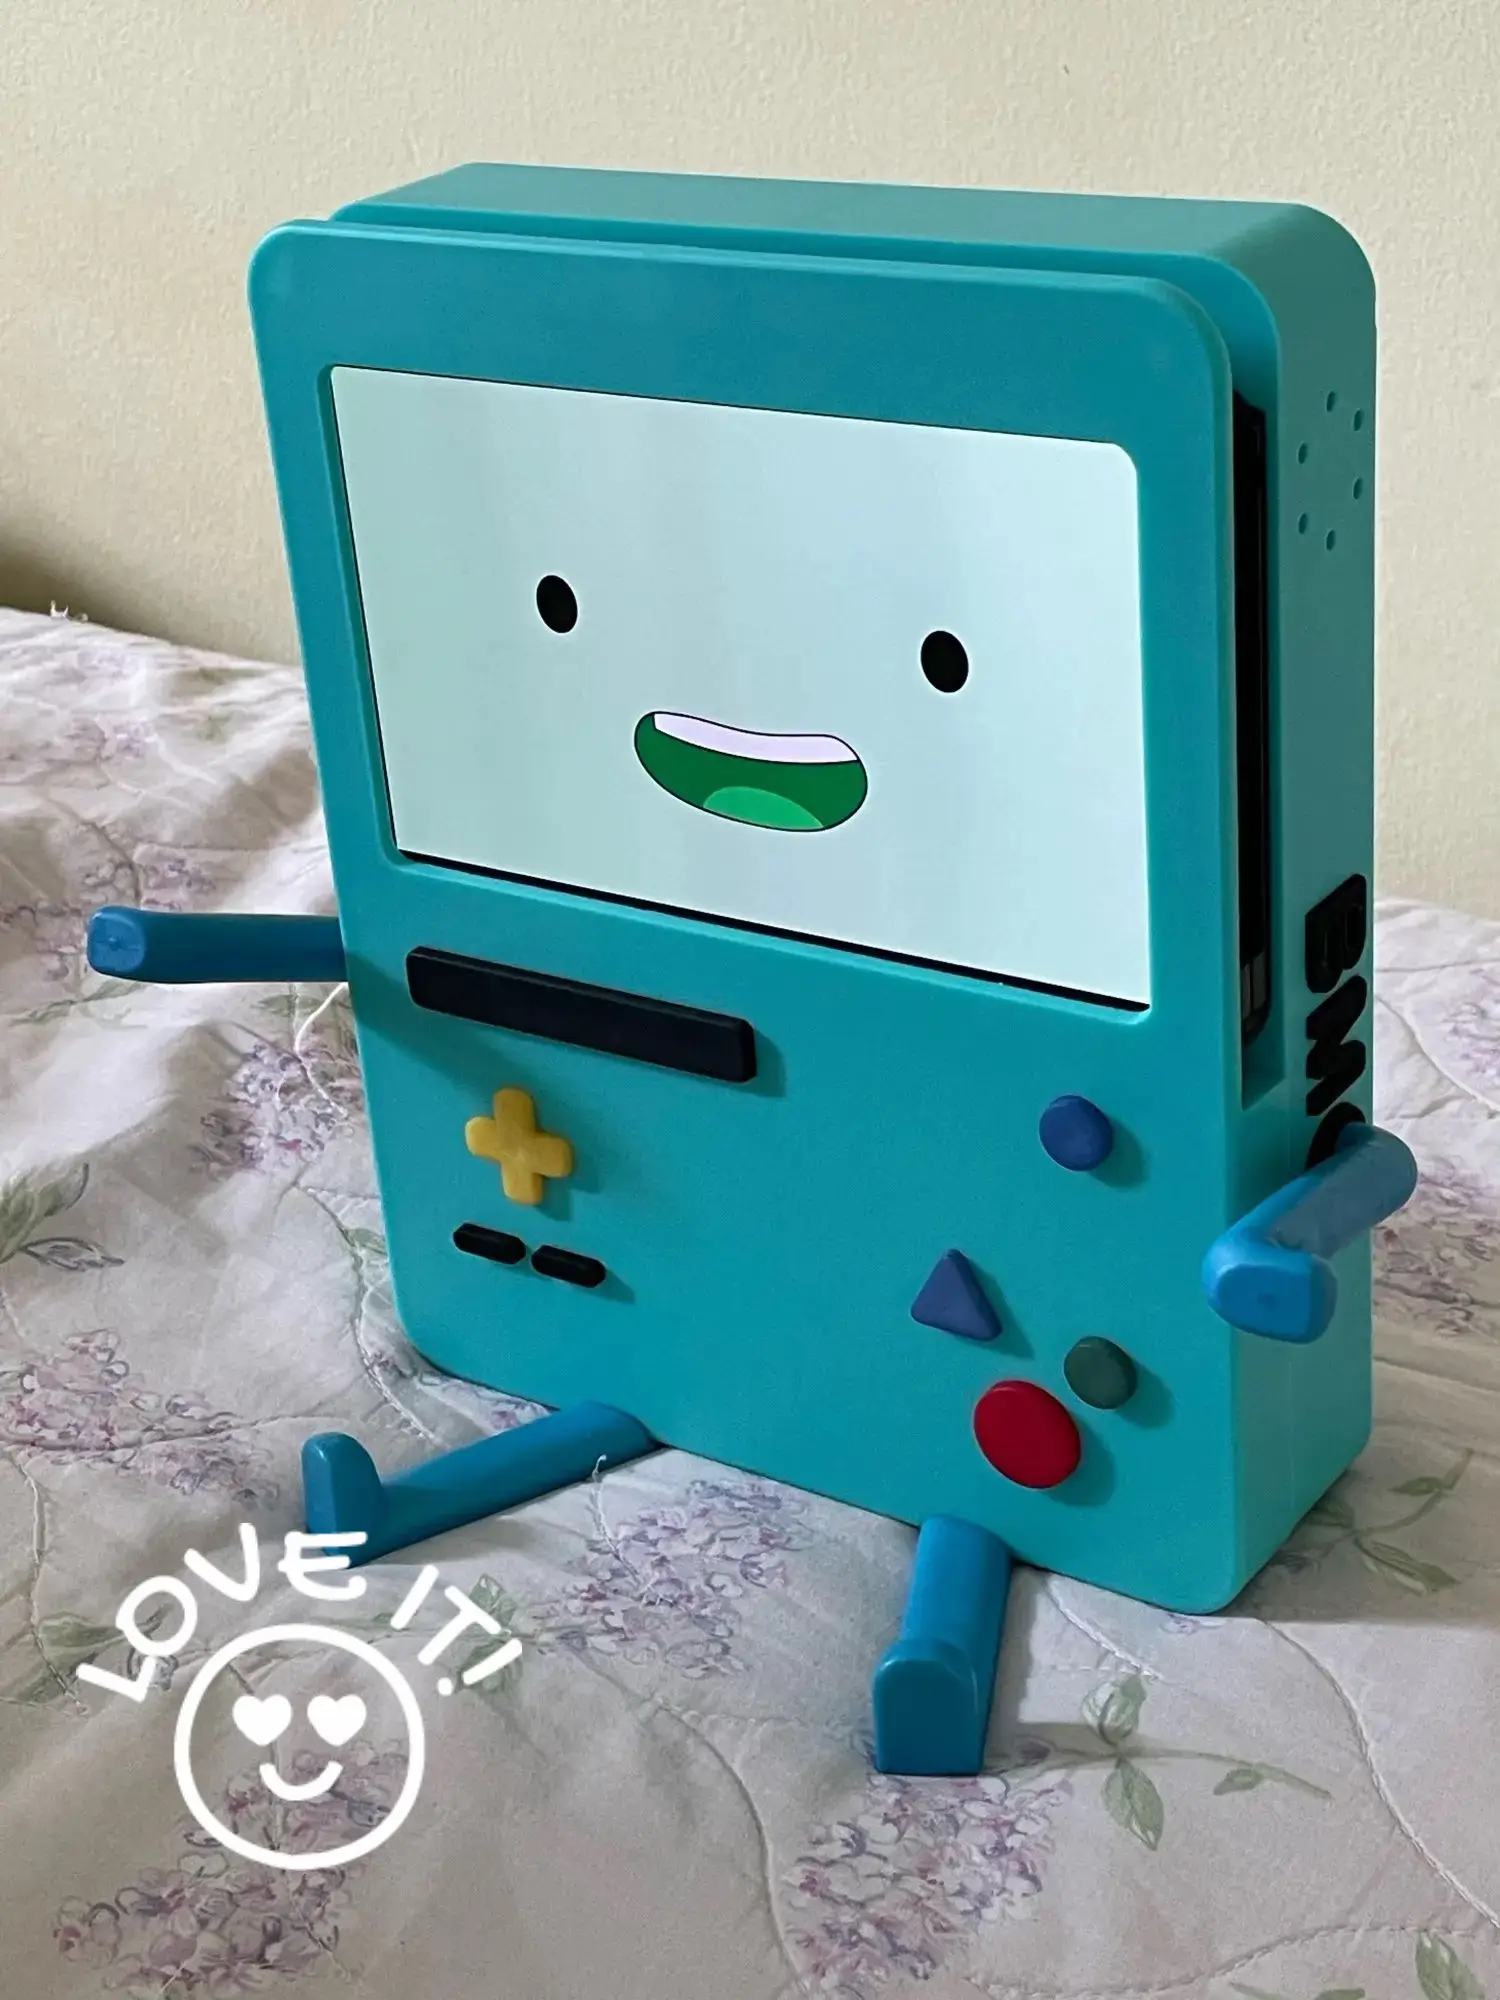 BMO Controller Stand